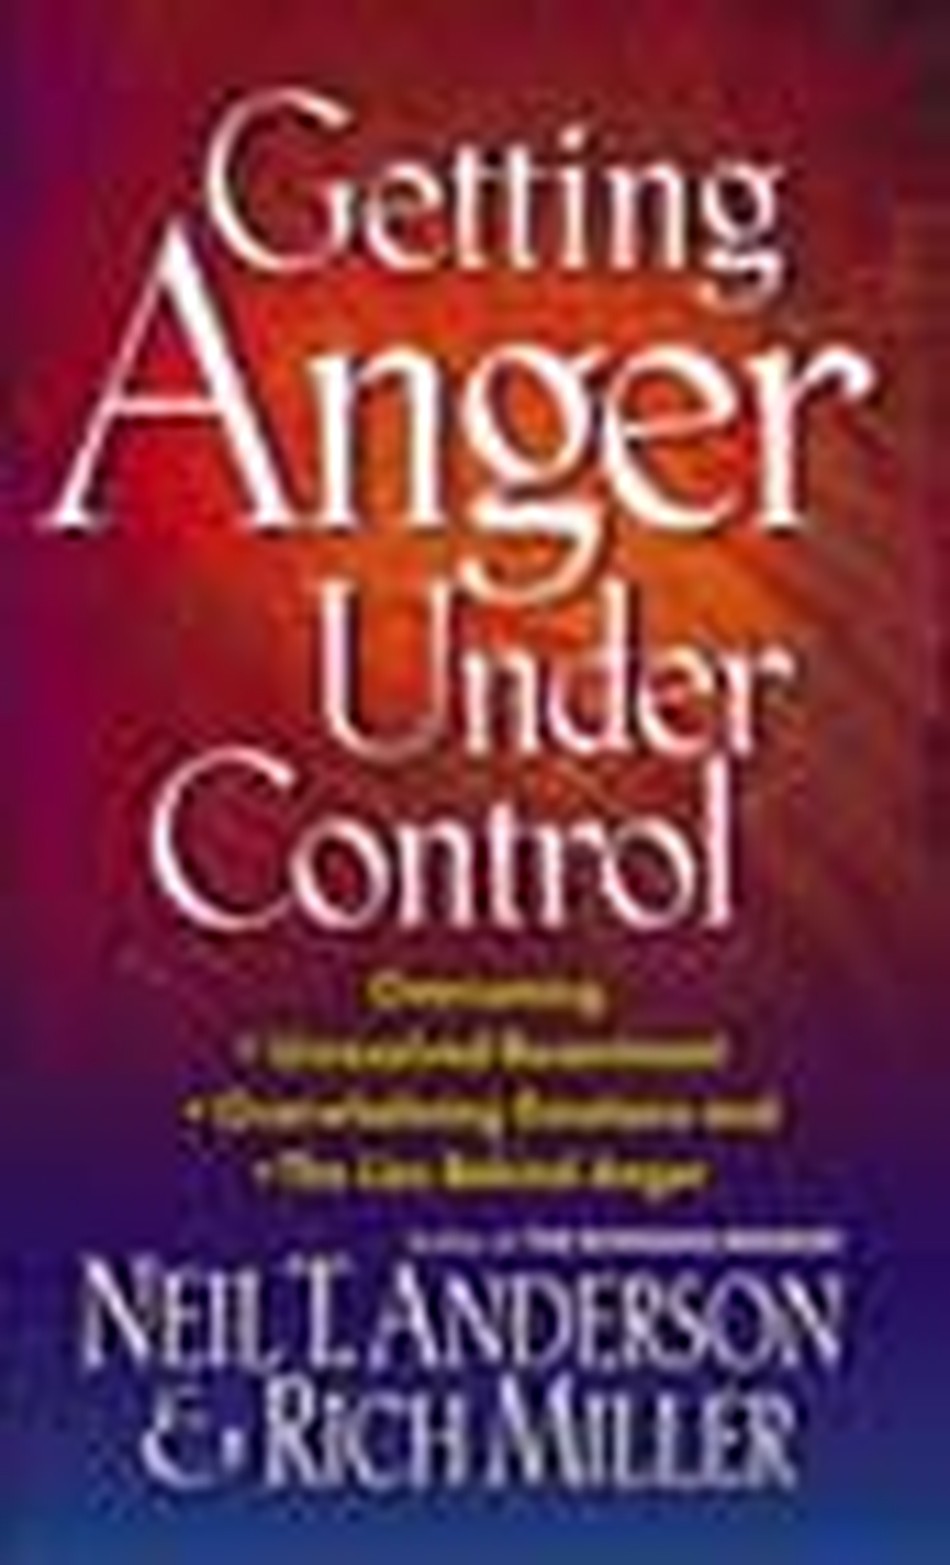 Control Your Anger So It Won't Control You